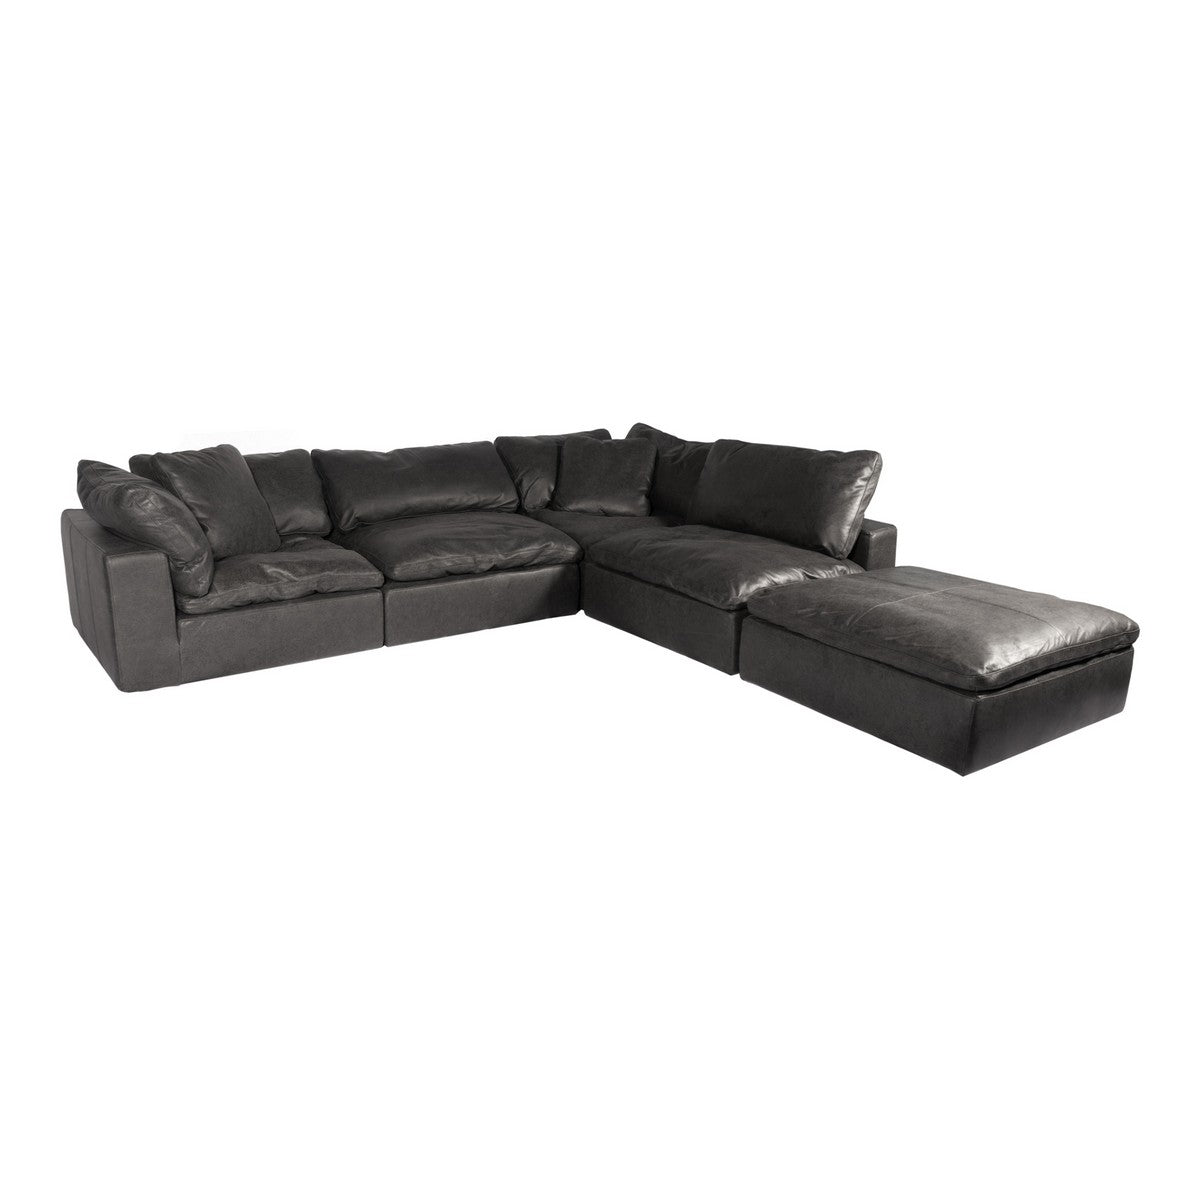 Moe's Home Collection Clay Dream Modular Sectional Nubuck Leather Black - YJ-1011-02